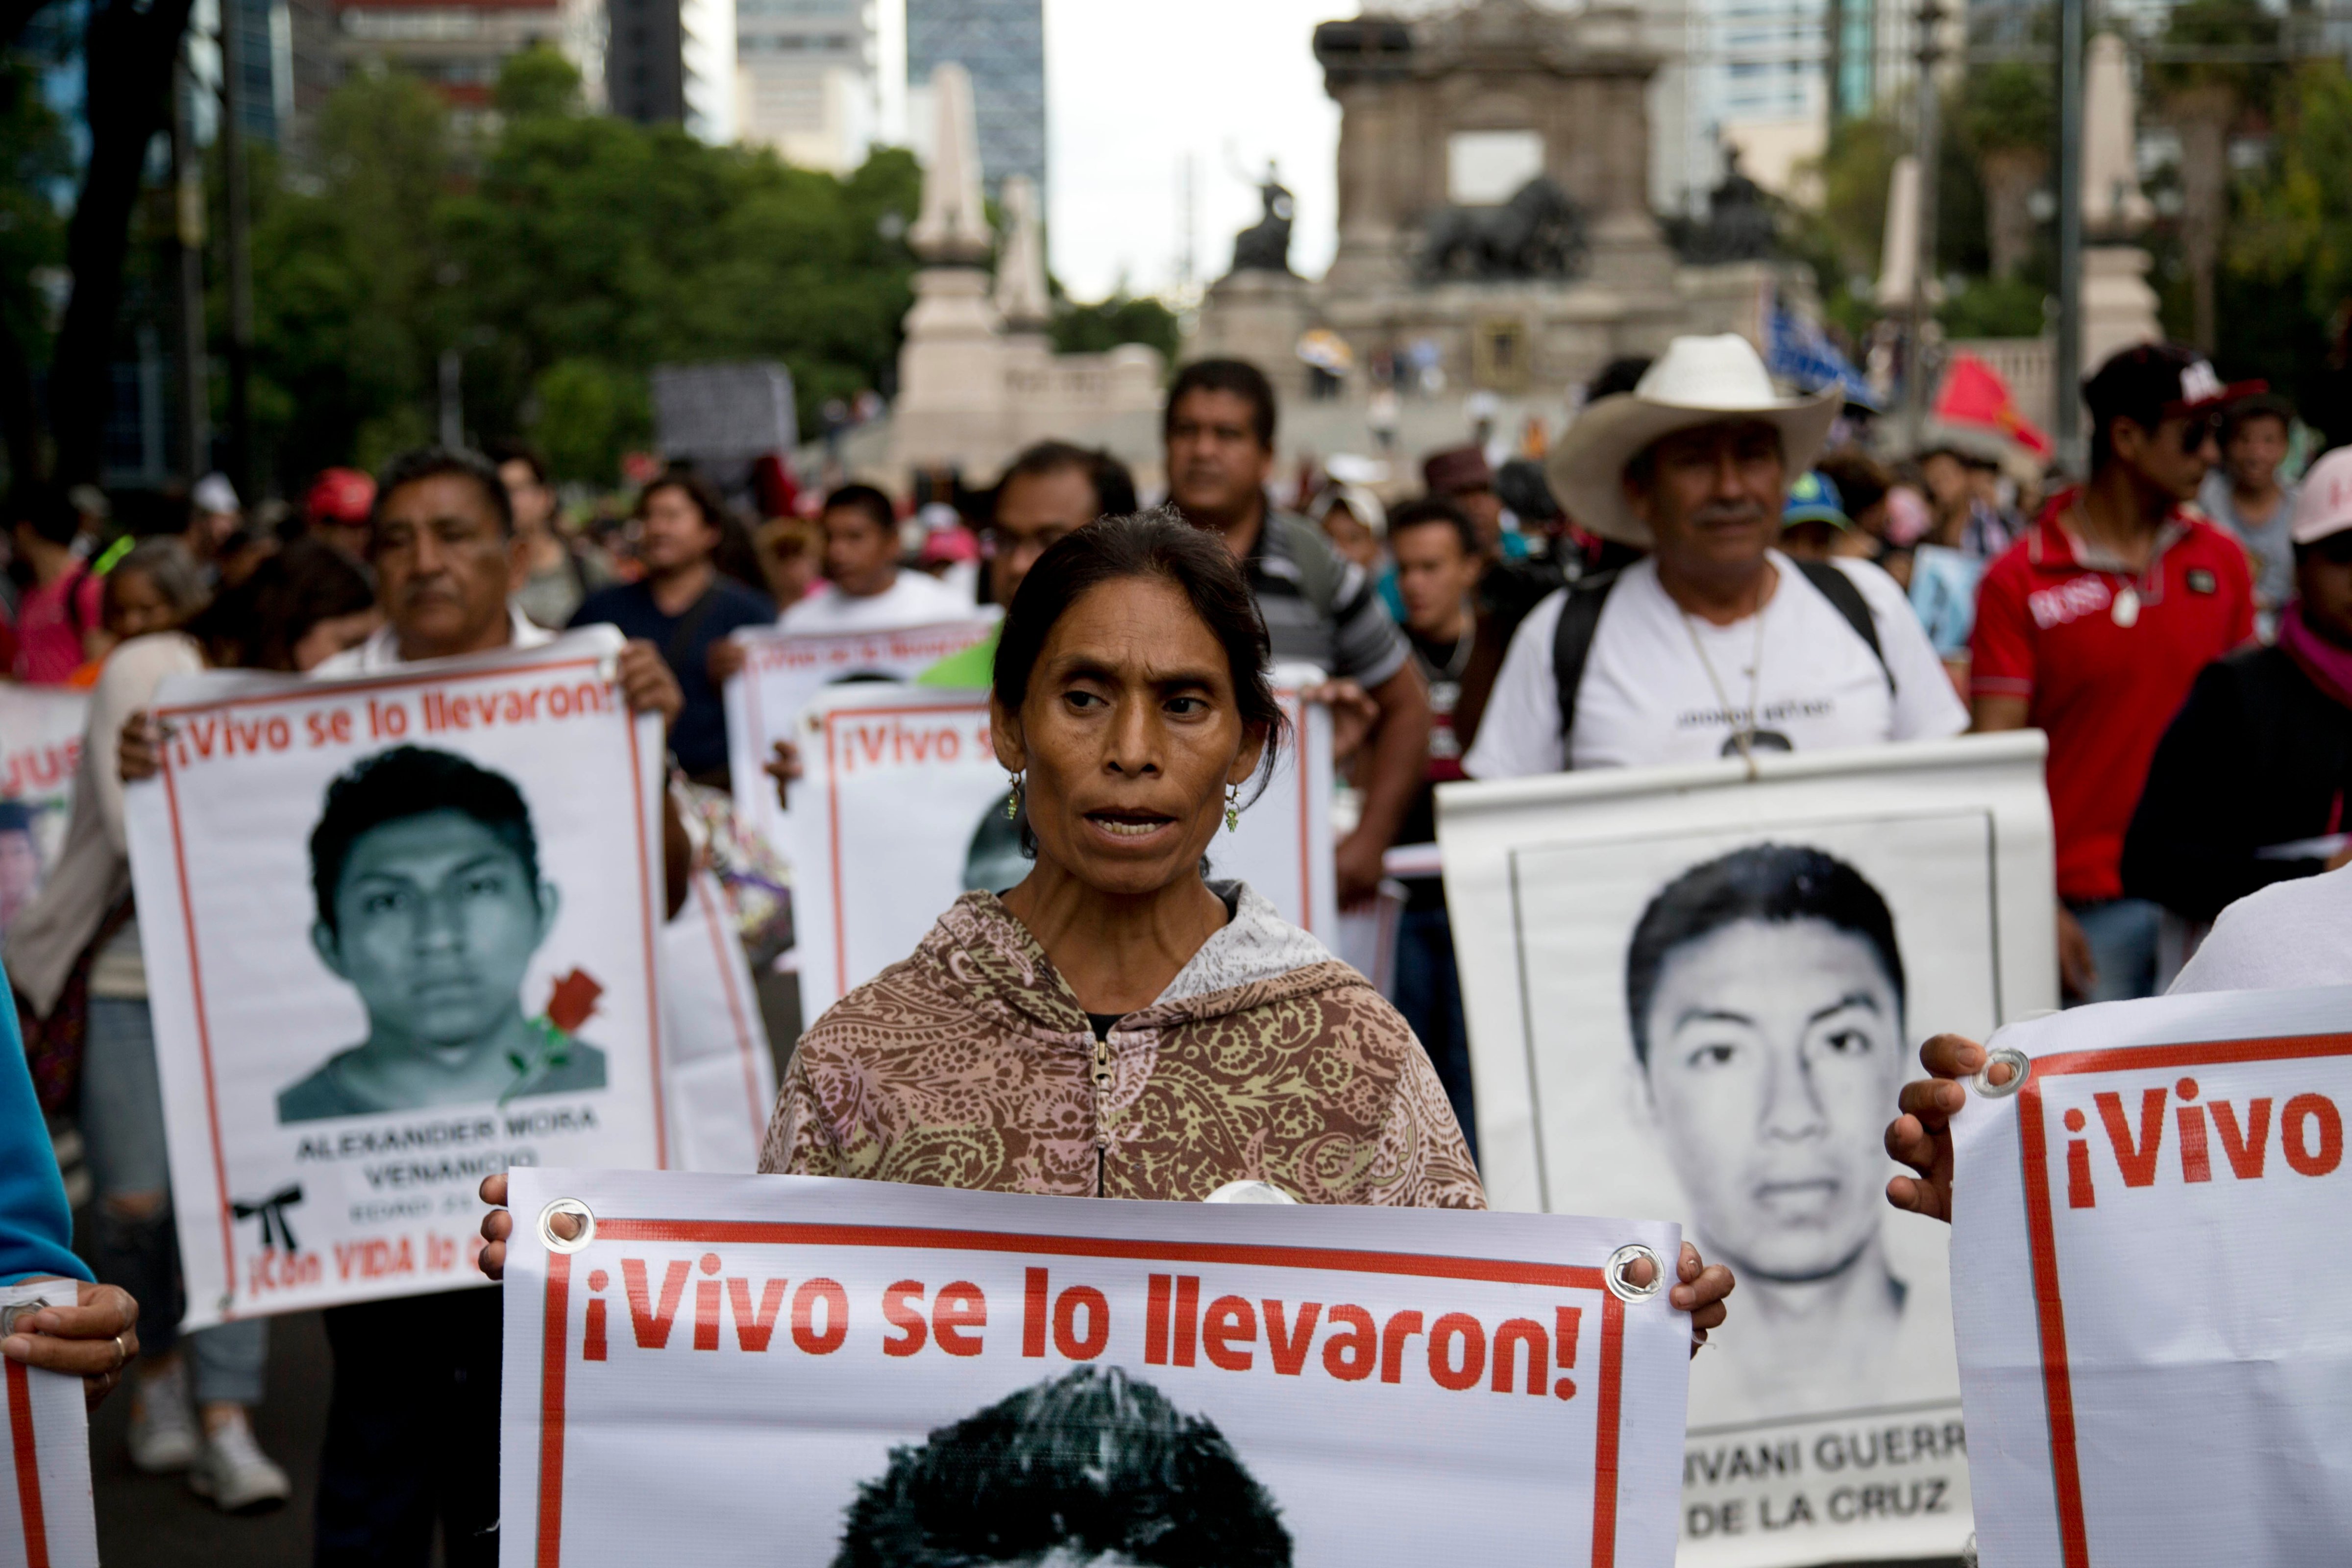 Relatives and protestors carry banners with pictures of some of the 43 missing students from a rural teachers college, during a march in Mexico City, Aug. 26, 2015 (Eduardo Verdugo—AP)